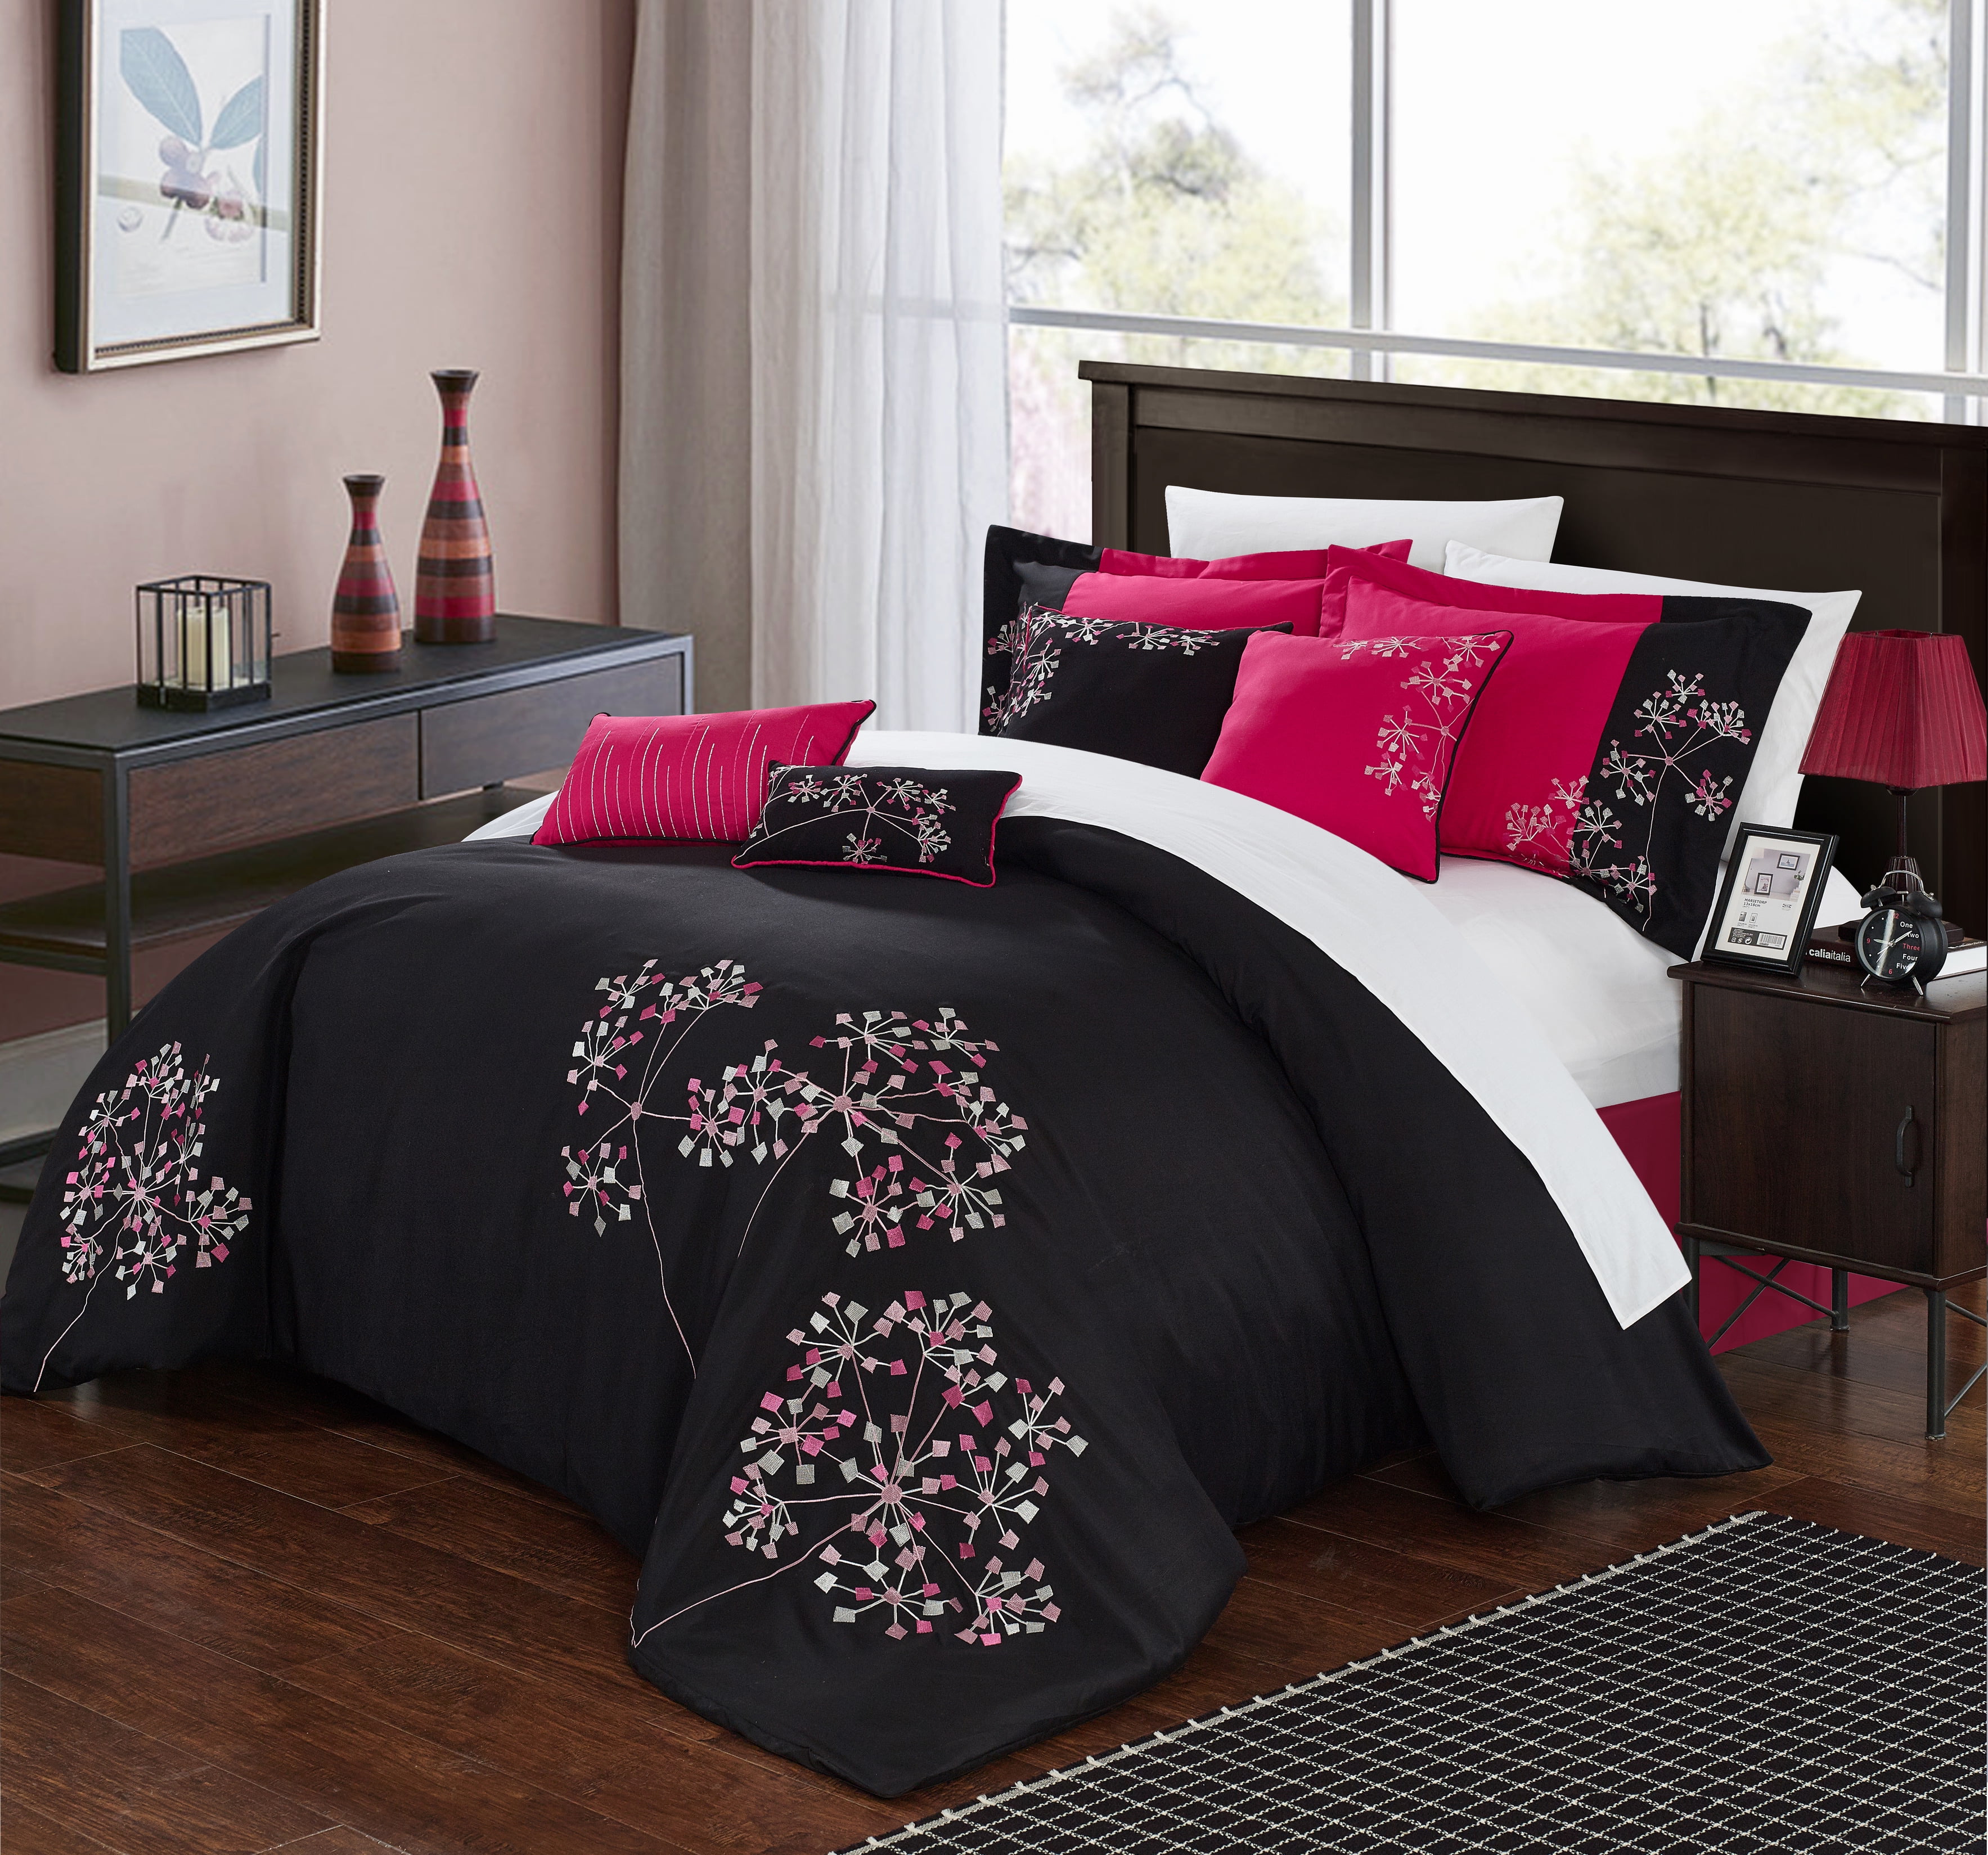 King Chic Home 8-Piece Embroidered Comforter Set Complete Embroidery Pattern Bag with Bed Skirt and Decorative Pillows Shams Floral Black White